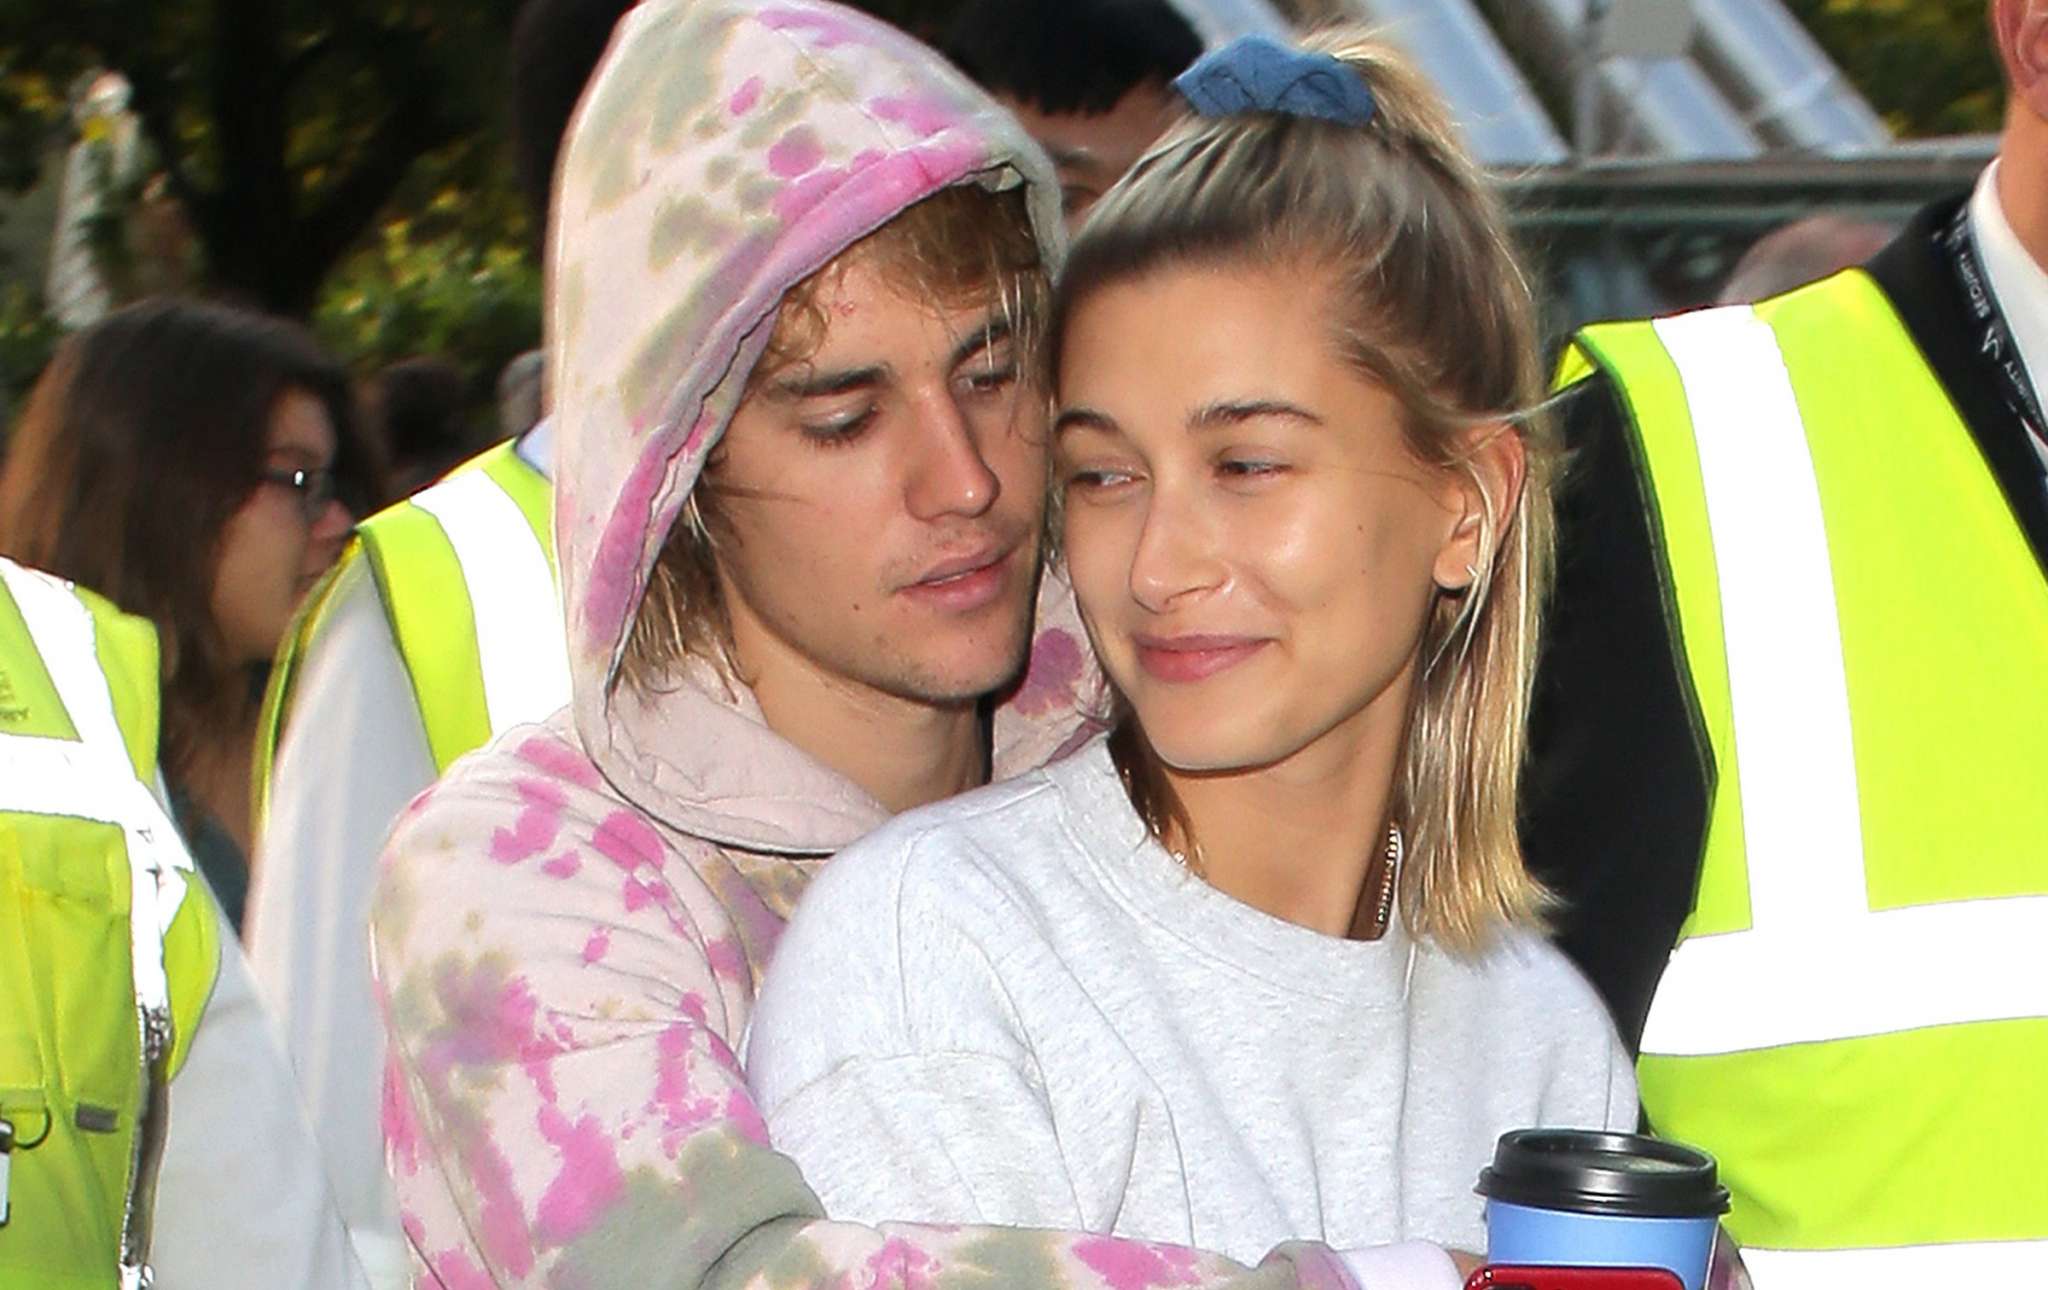 Justin Bieber Writes Wife Hailey Baldwin A Poem – Check It Out! | Celebrity Insider